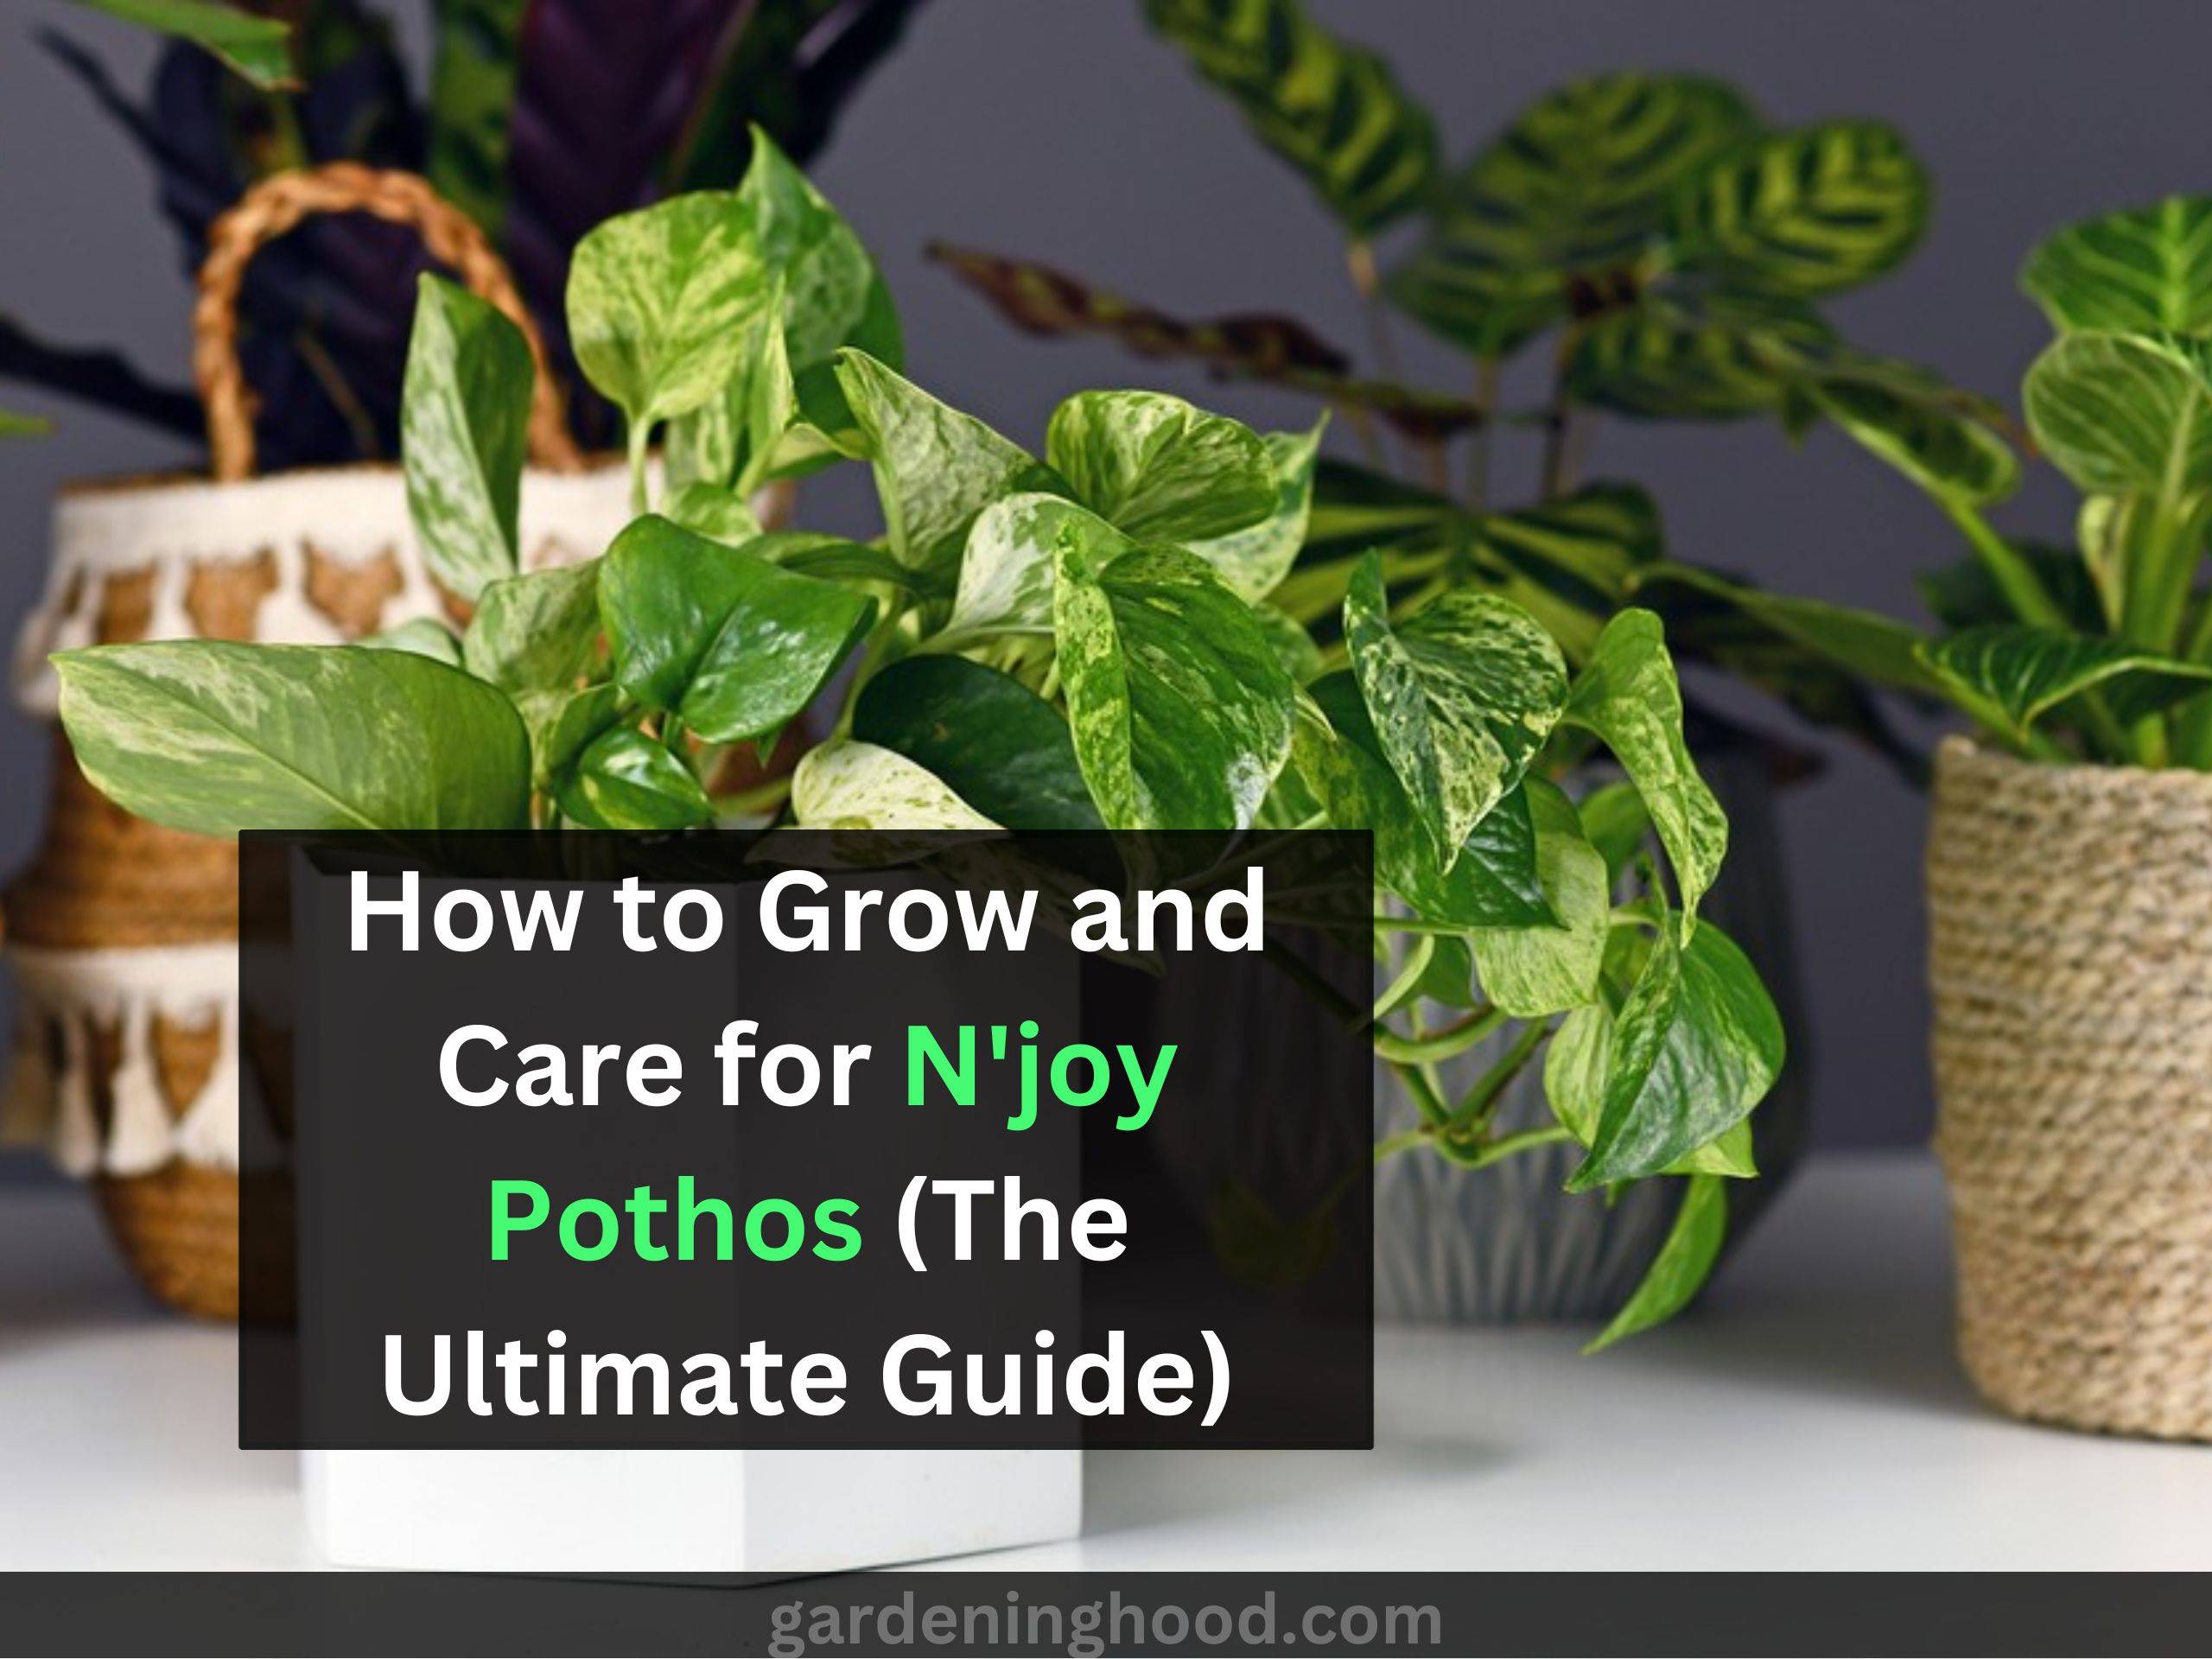 How to Grow and Care for N'joy Pothos (The Ultimate Guide)